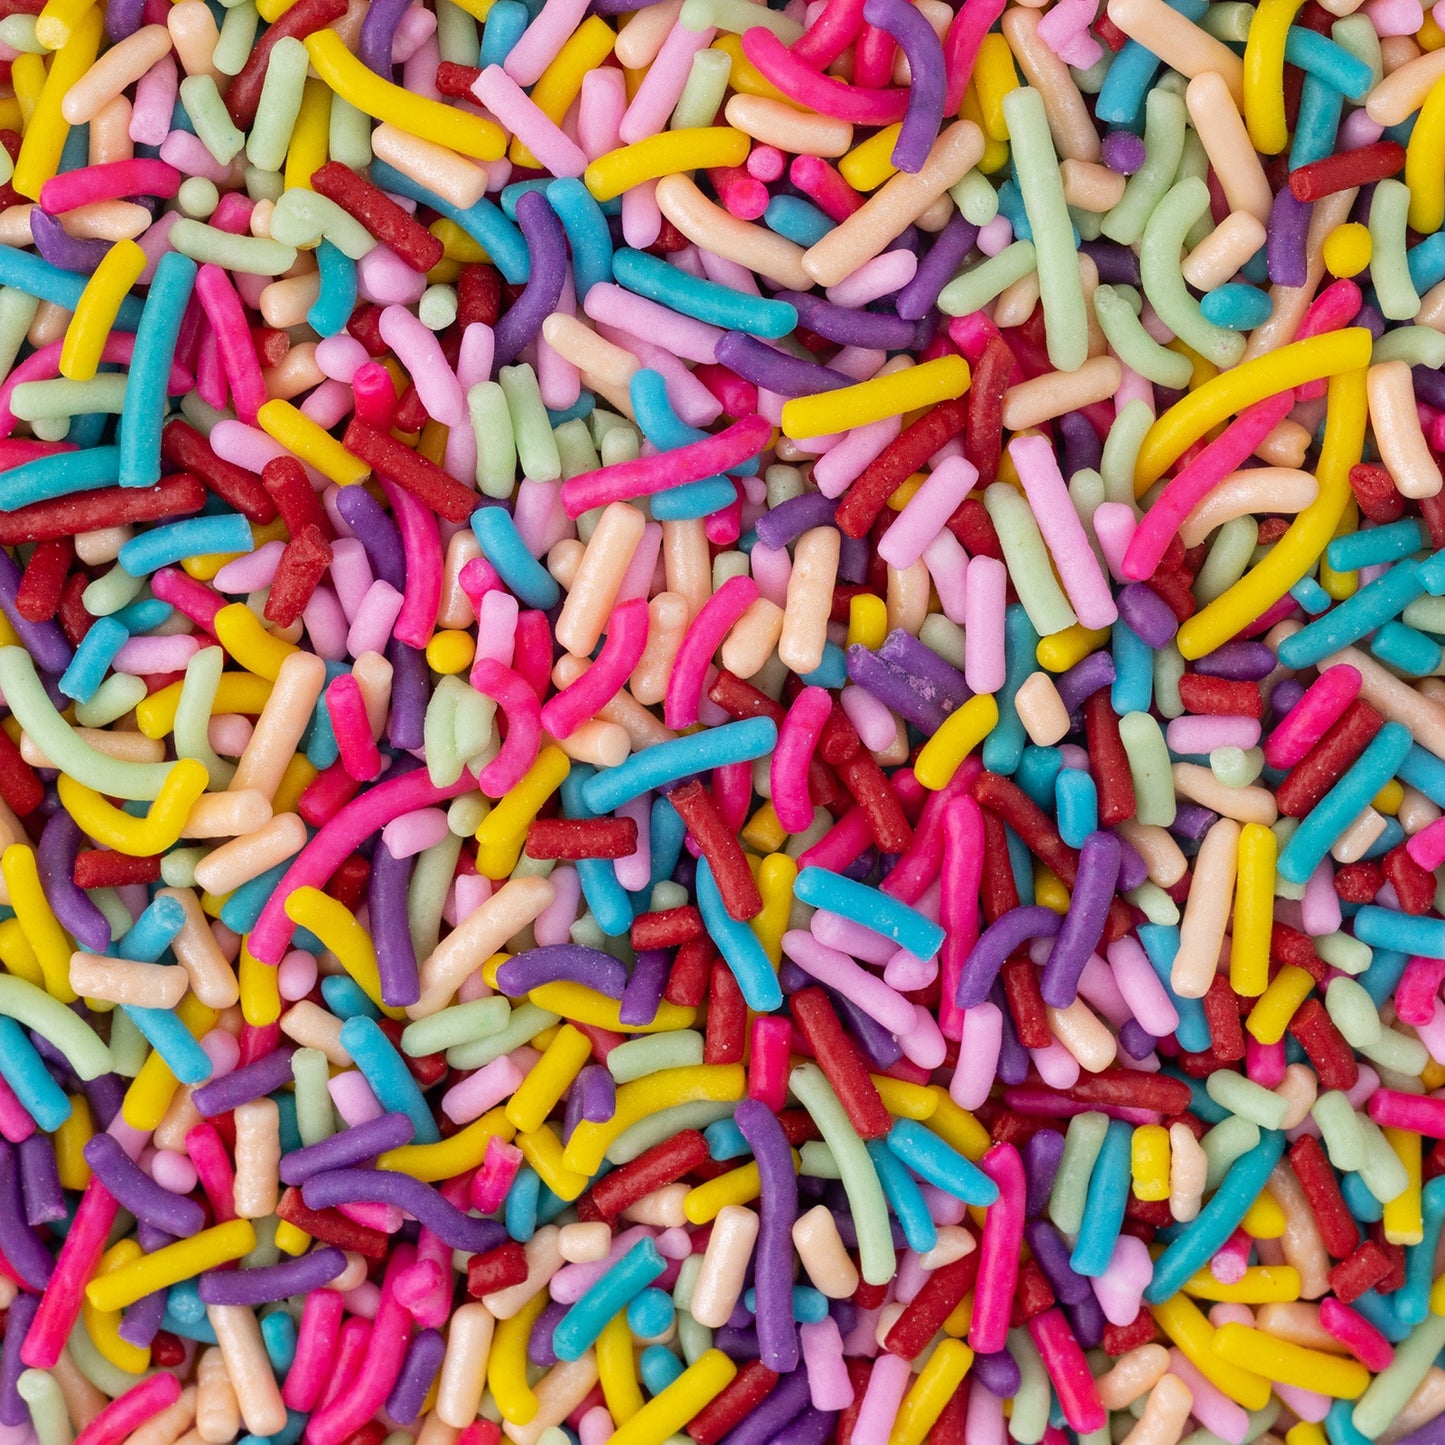 Sprinkles at the End of the Rainbow Sprinkle Mix 